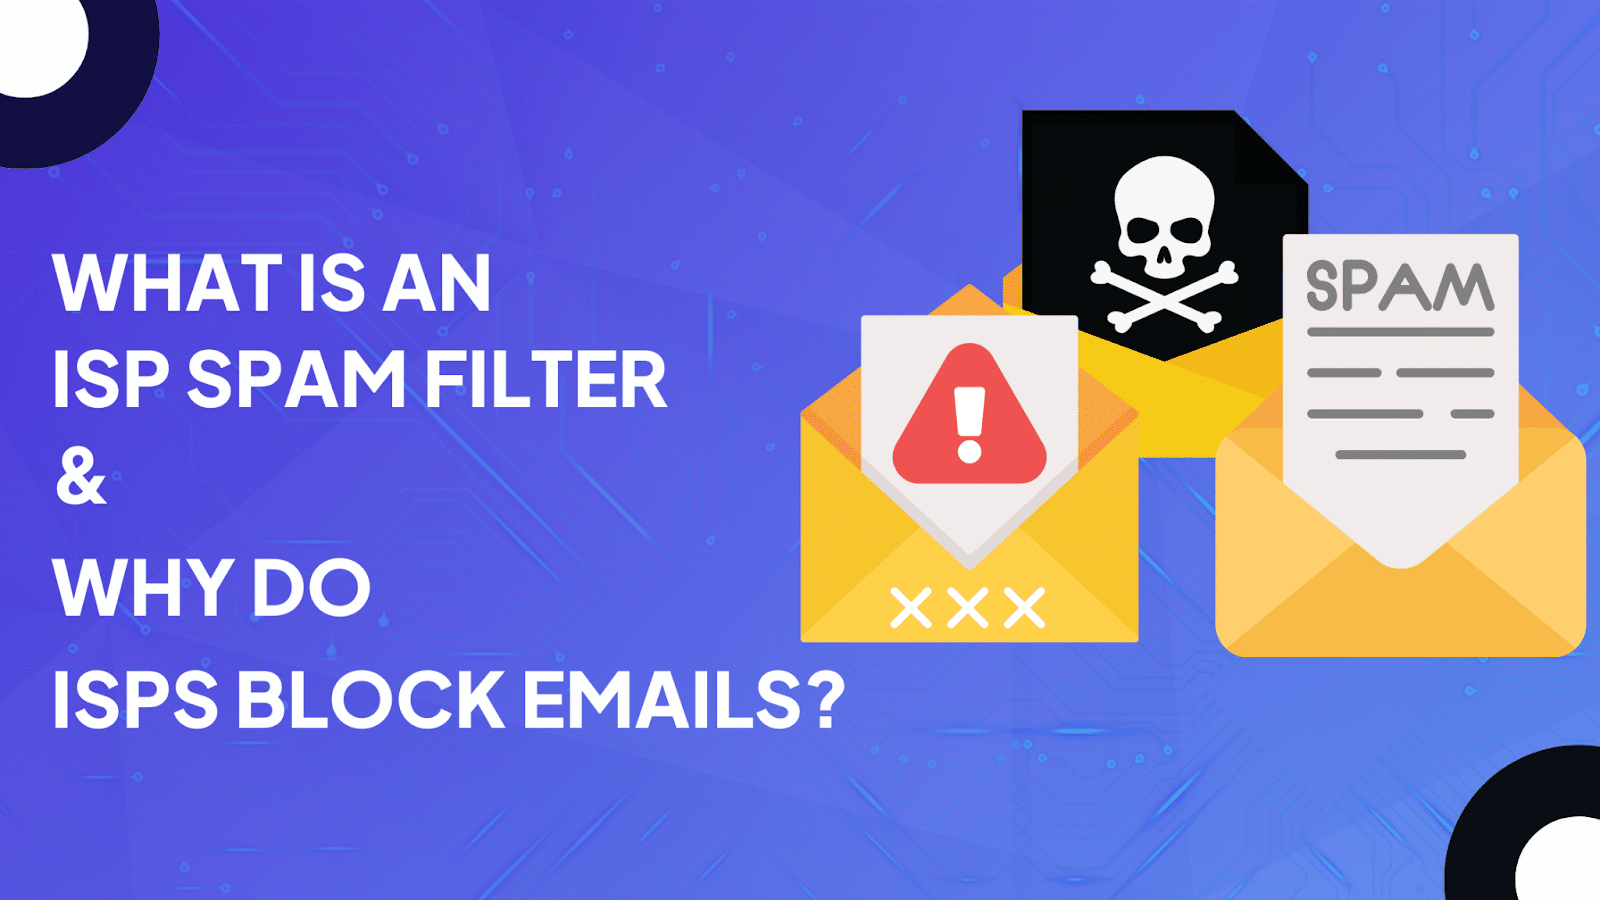 What is an ISP Spam Filter & Why Do ISPs Block Emails?